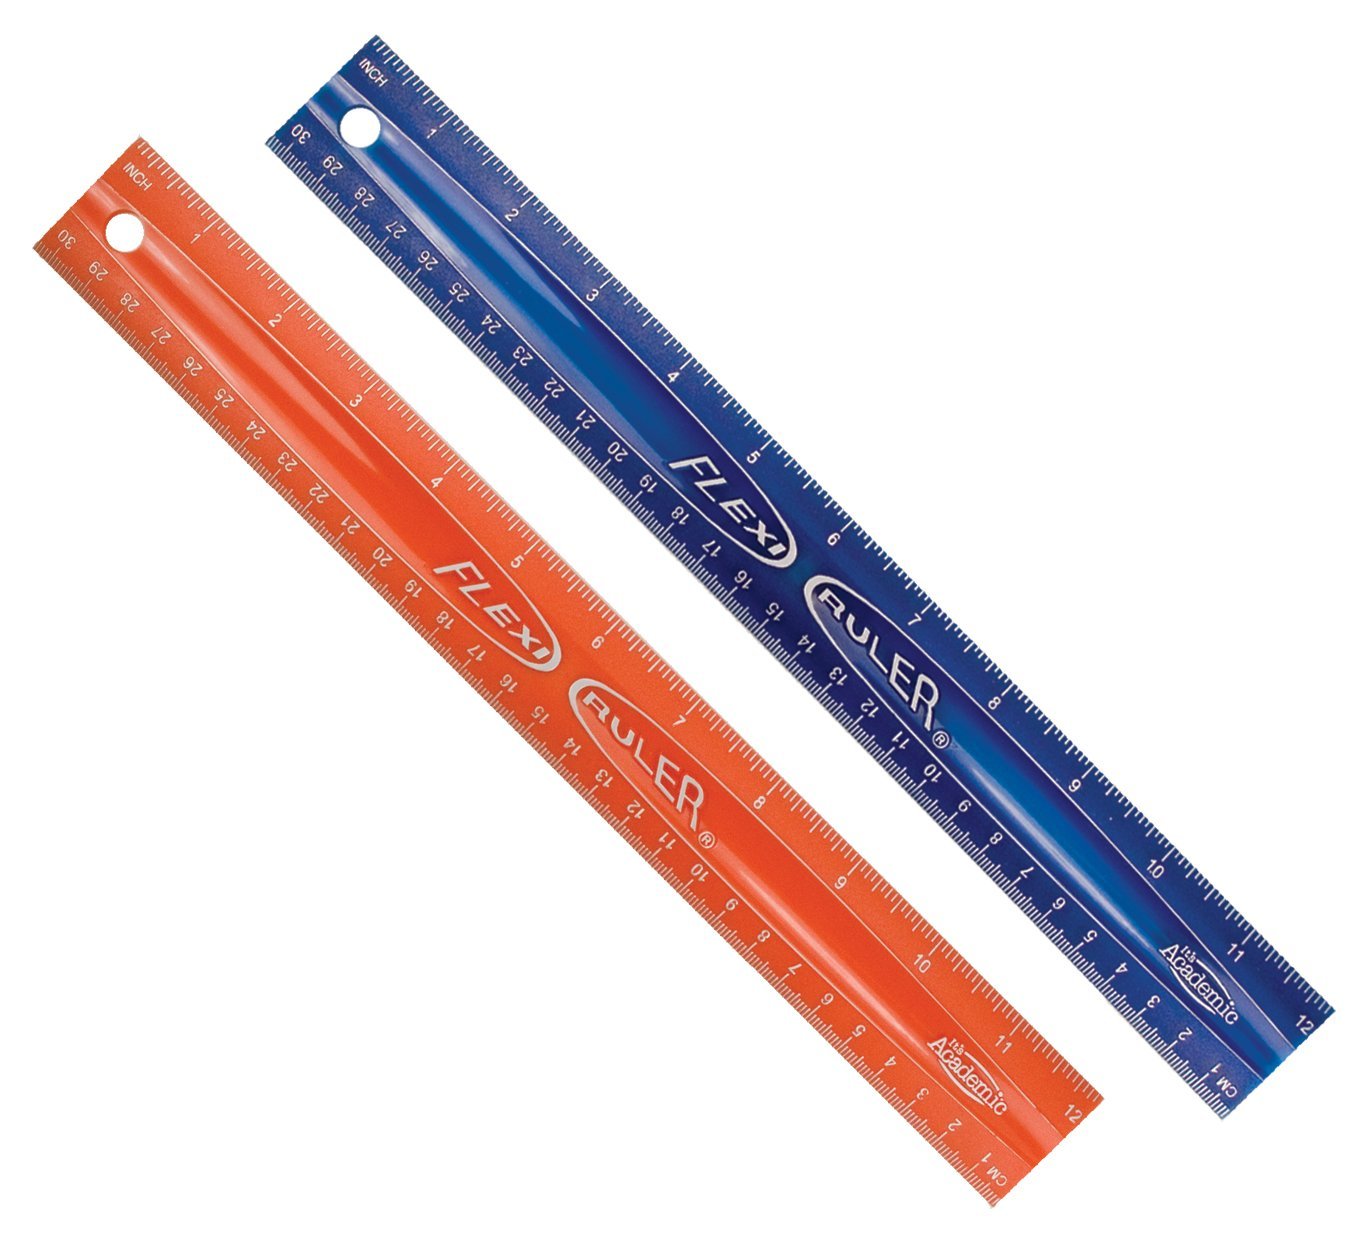 Hot 12 Flexible Ruler Only 097 Lowest Price Become A Coupon